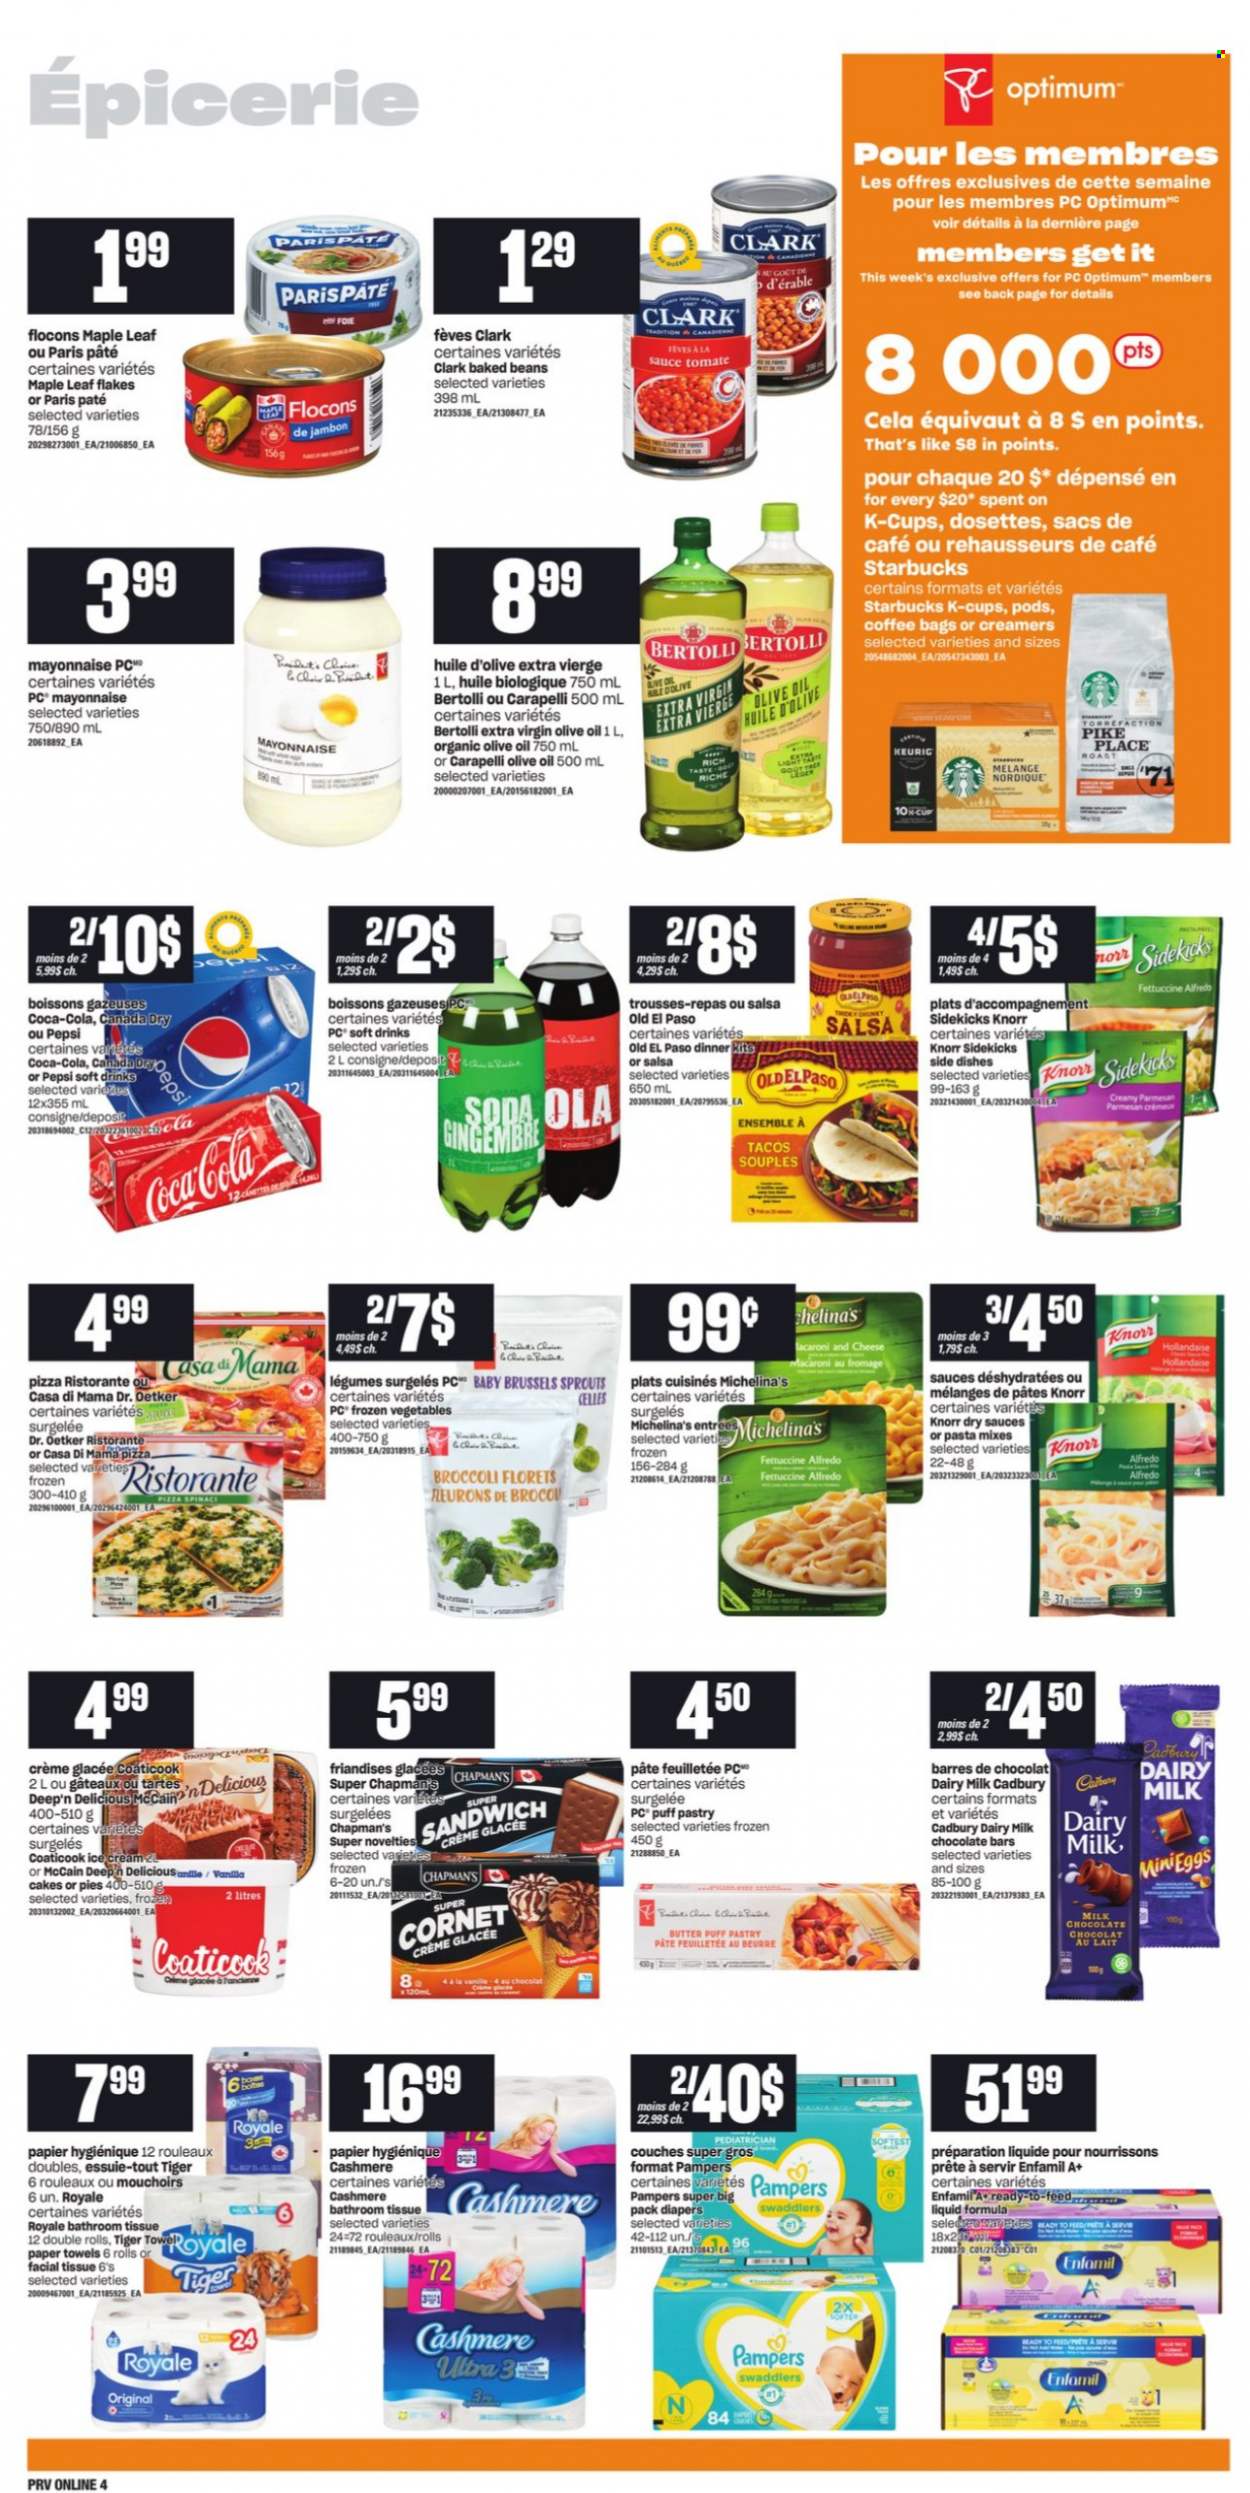 thumbnail - Provigo Flyer - October 21, 2021 - October 27, 2021 - Sales products - cake, Old El Paso, tacos, broccoli, brussel sprouts, pizza, sandwich, macaroni, Bertolli, parmesan, Dr. Oetker, butter, mayonnaise, puff pastry, ice cream, Ola, frozen vegetables, McCain, milk chocolate, Cadbury, Dairy Milk, chocolate bar, baked beans, salsa, extra virgin olive oil, olive oil, oil, Canada Dry, Coca-Cola, Pepsi, soft drink, coffee, coffee capsules, Starbucks, K-Cups, Keurig, Enfamil, nappies, bath tissue, kitchen towels, paper towels, Knorr, Pampers. Page 8.